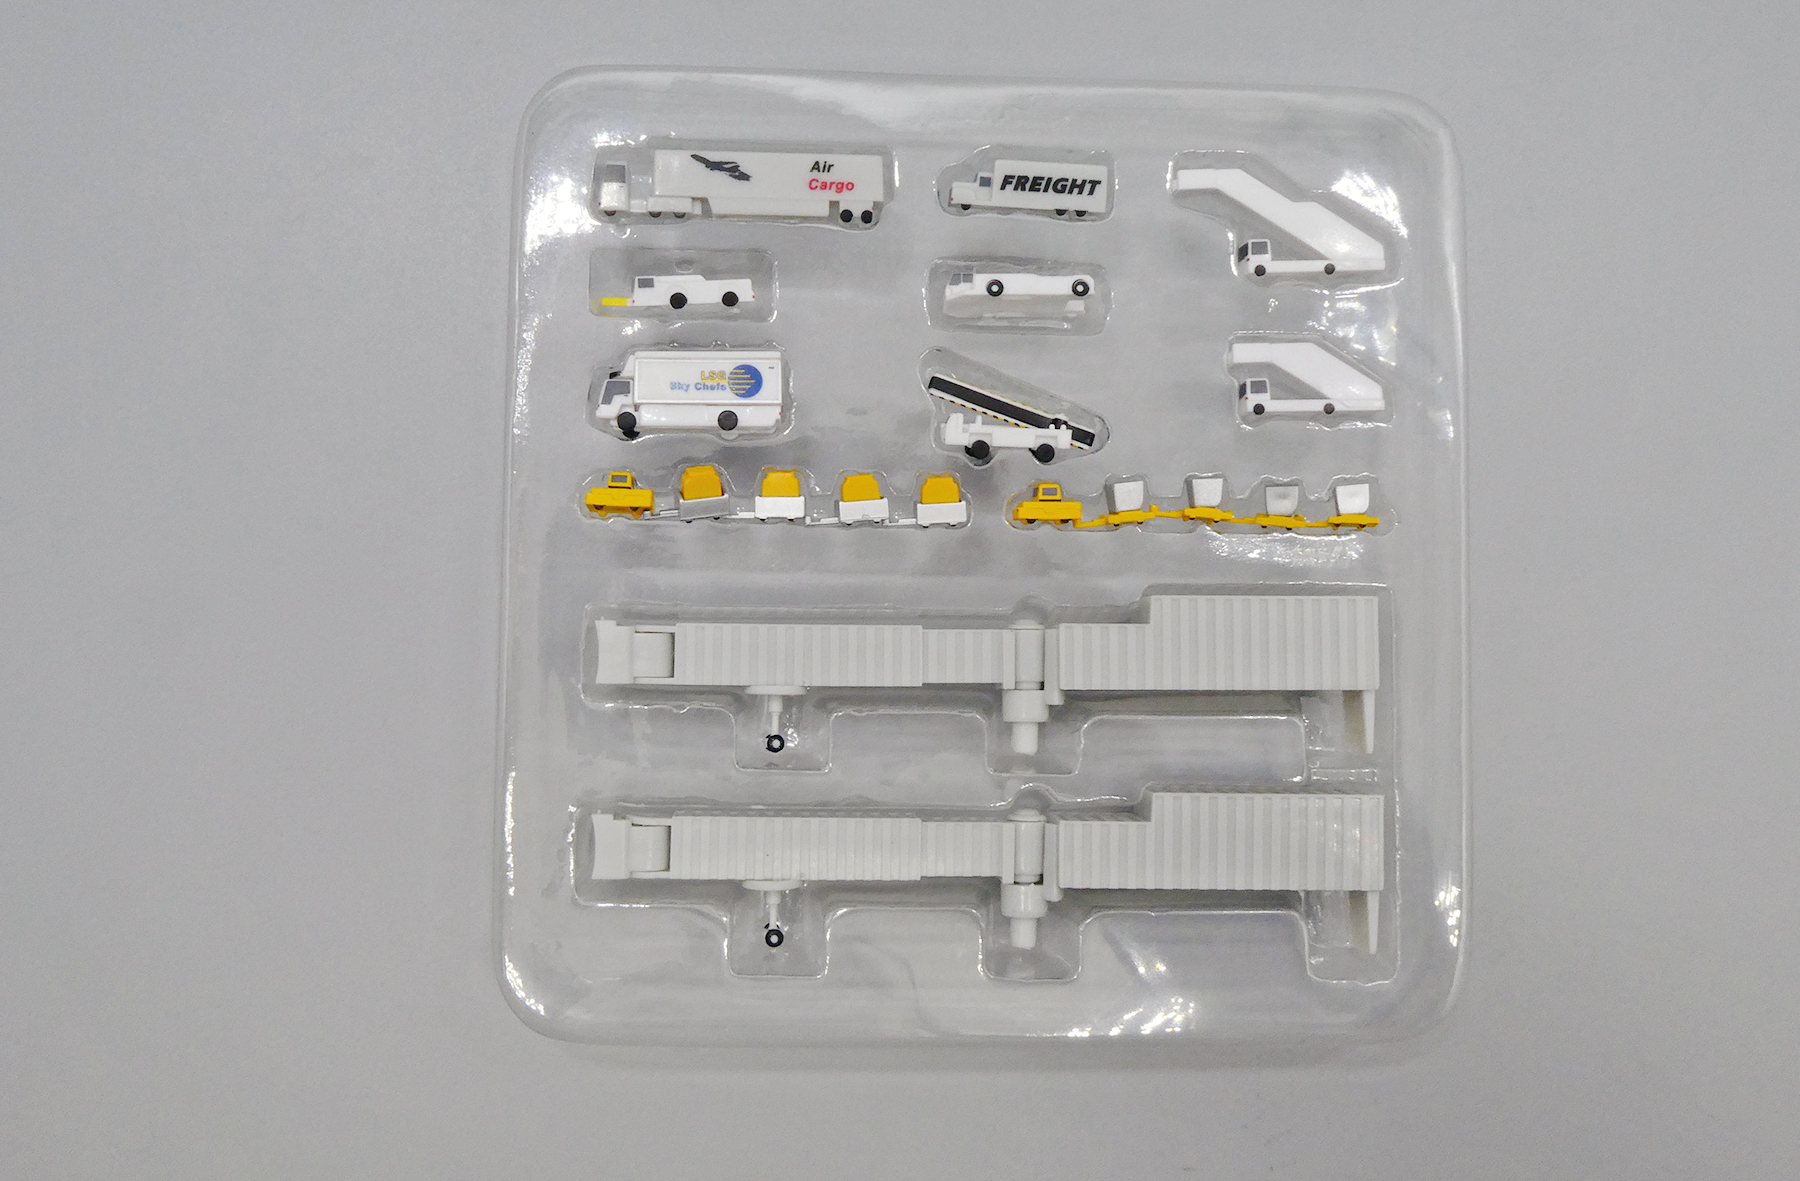 1:400 JC Wings Airplane Stand Clear ST4002 Airport Accessory Fits 1:400 Models 